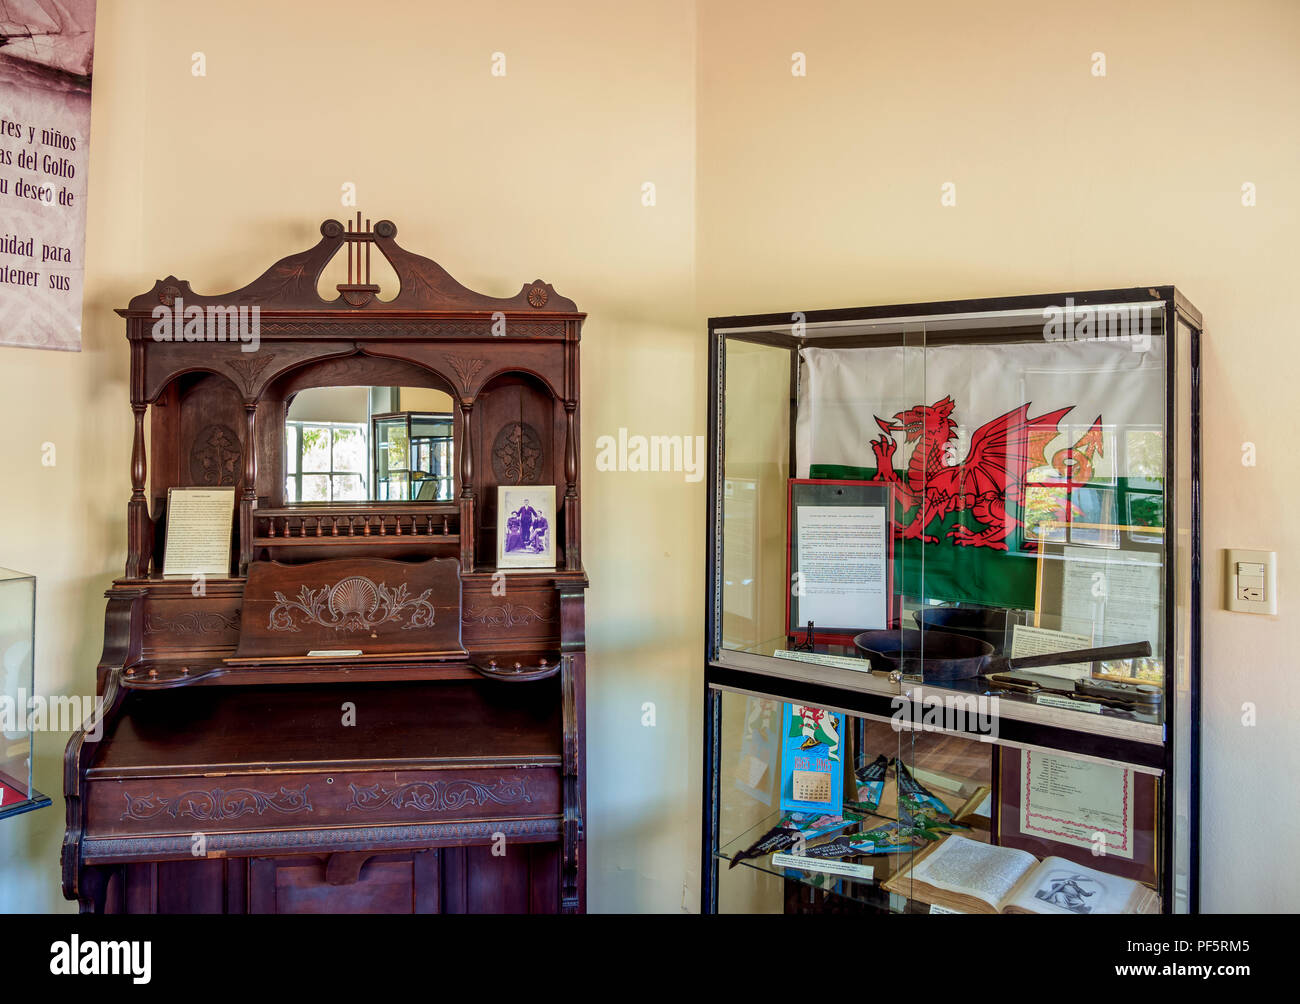 Museo Pueblo de Luis, Welsh People Museum, interior, Trelew, The Welsh Settlement, Chubut Province, Patagonia, Argentina Stock Photo